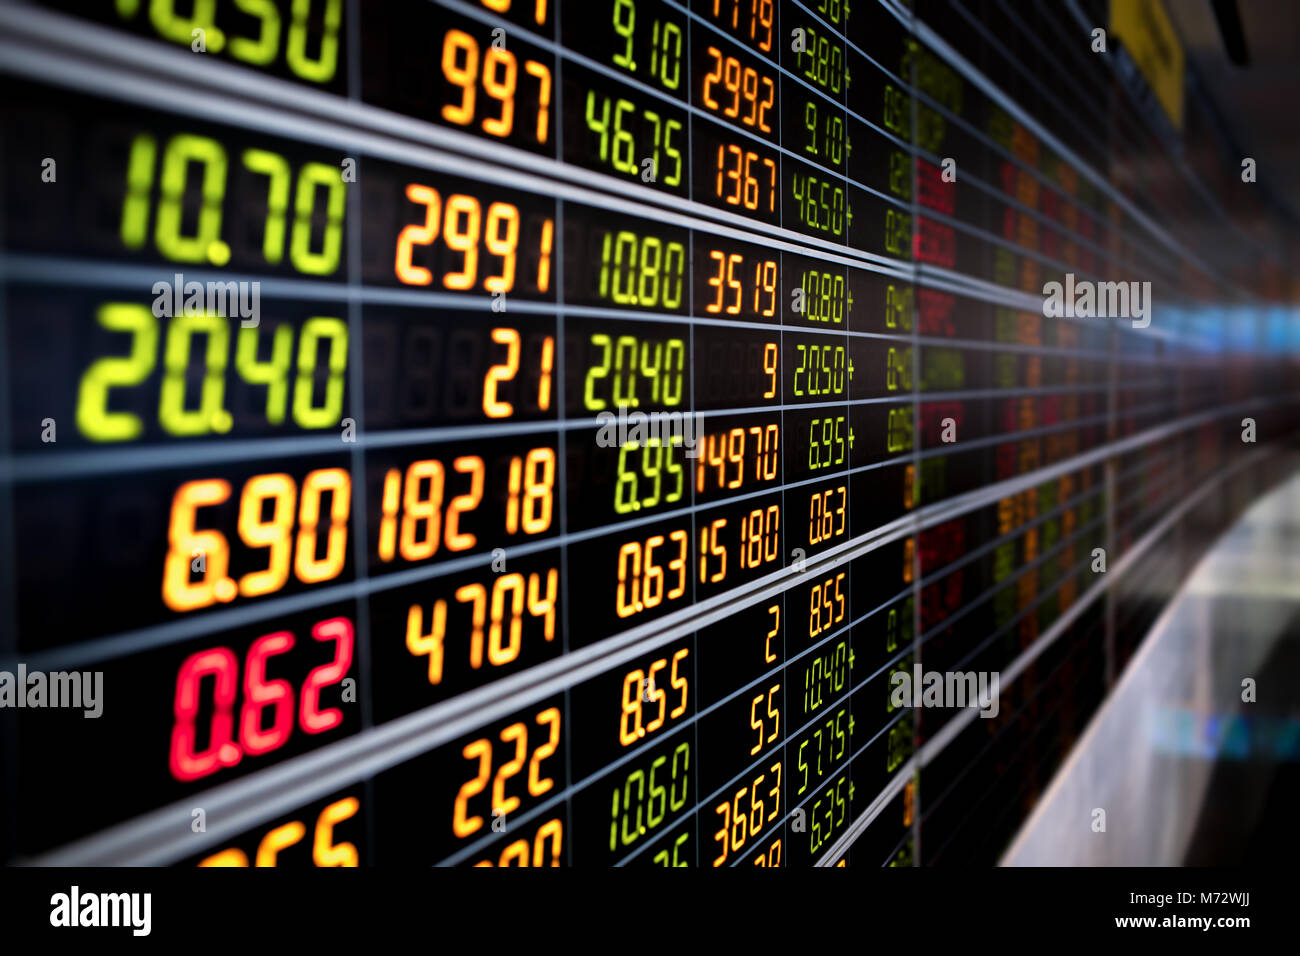 stock market chart or stock market board with led display Stock Photo